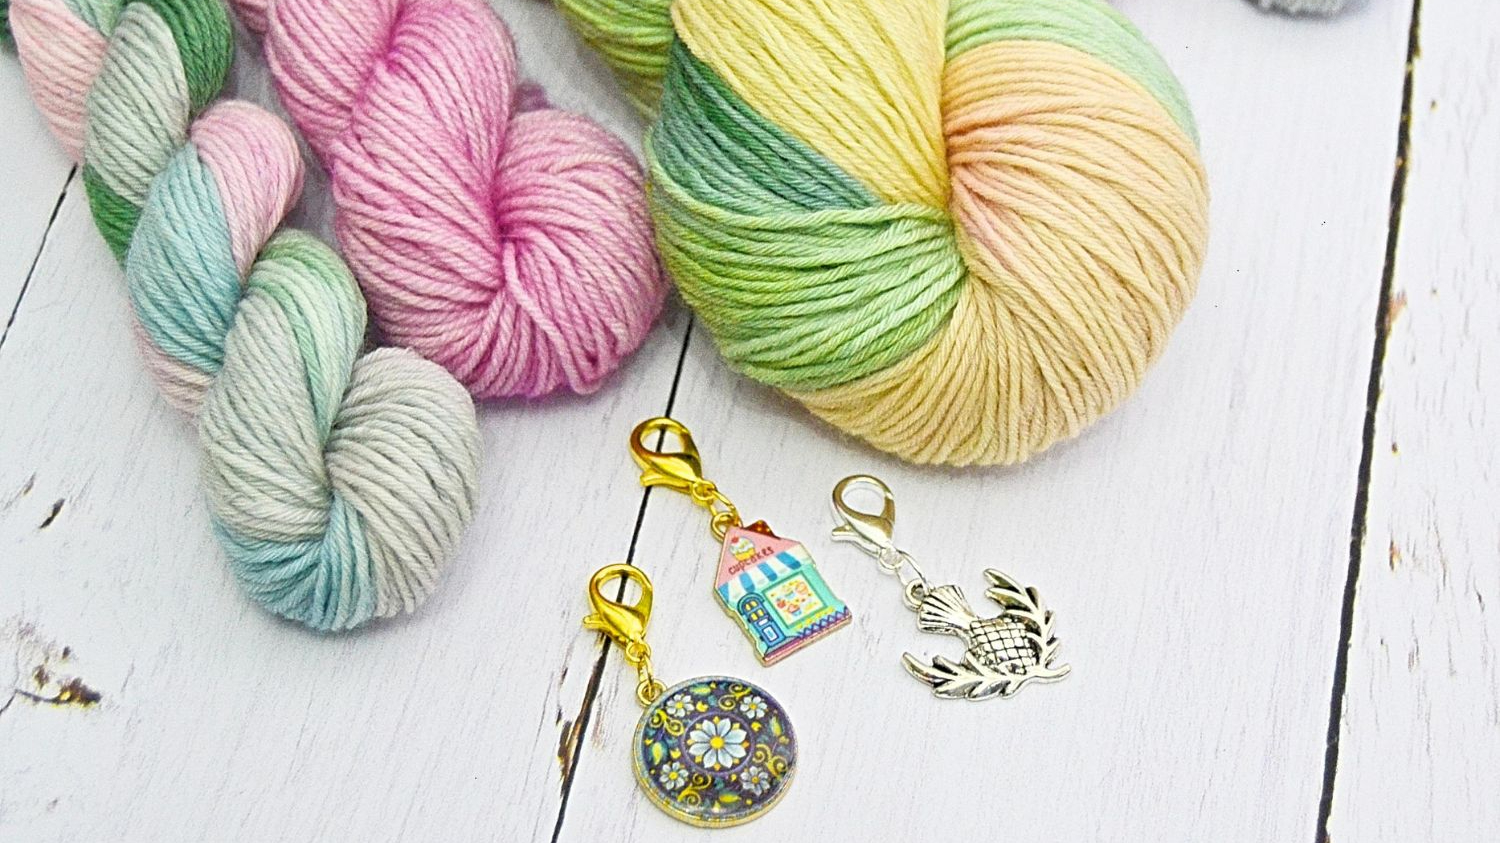 Hand-dyed wool and three classic stitch markers